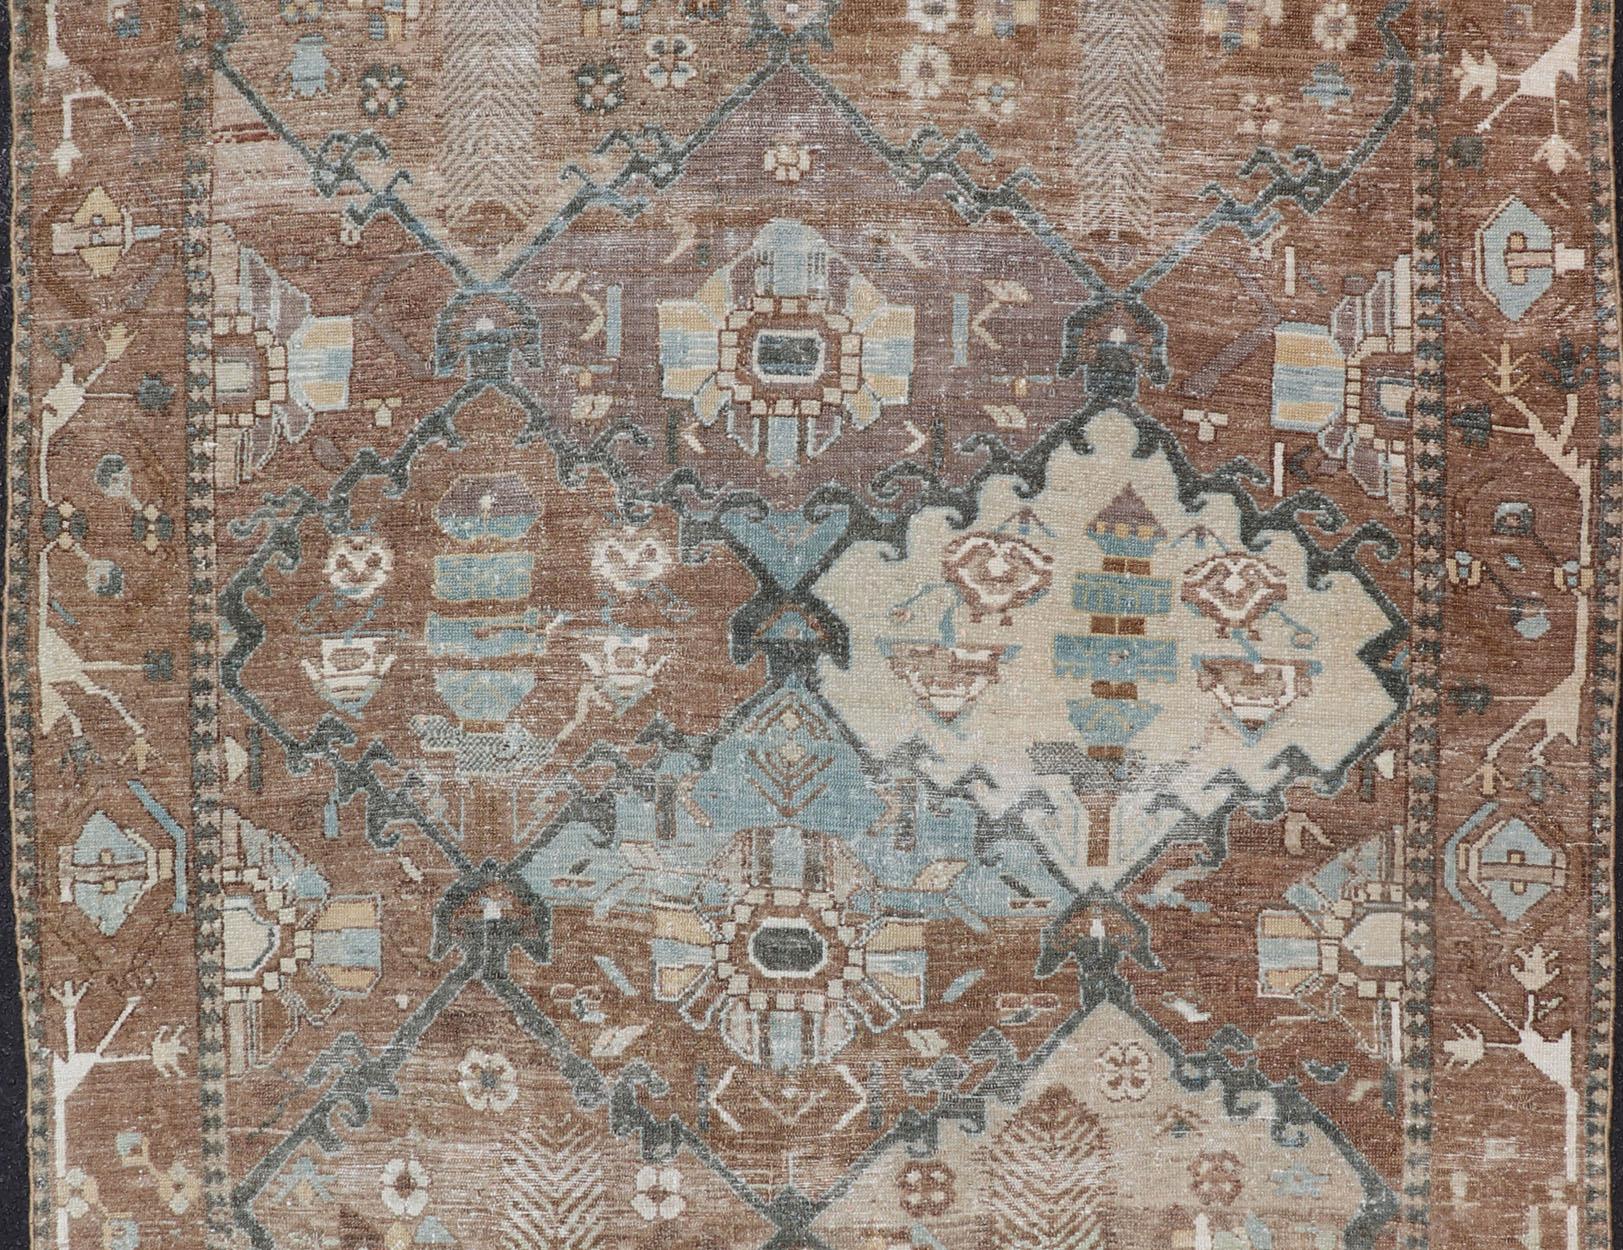 Bakshaish Antique Persian Bakhitari Rug with All-Over Patten in Earthy and Brown Tones